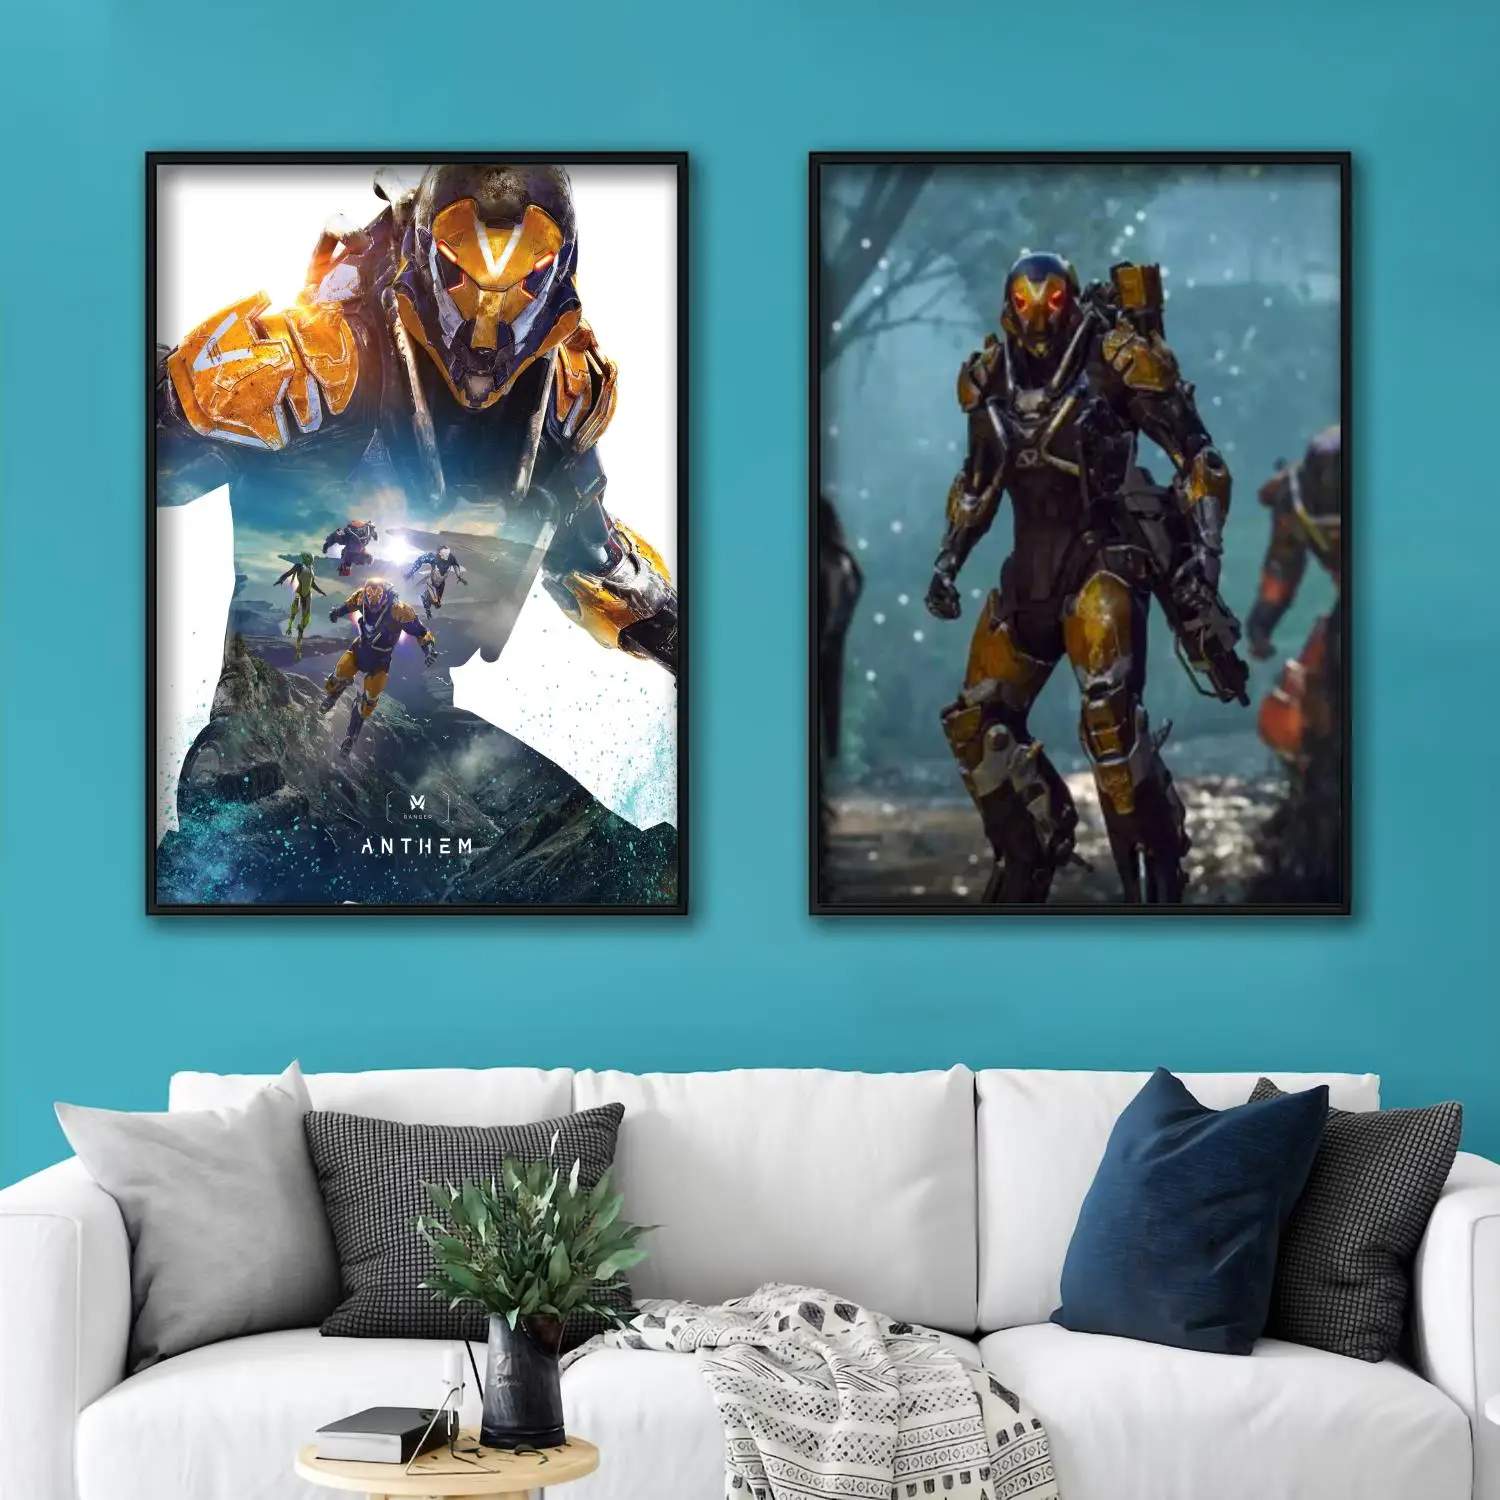 

anthem poster Decorative Canvas Posters Room Bar Cafe Decor Gift Print Art Wall Paintings